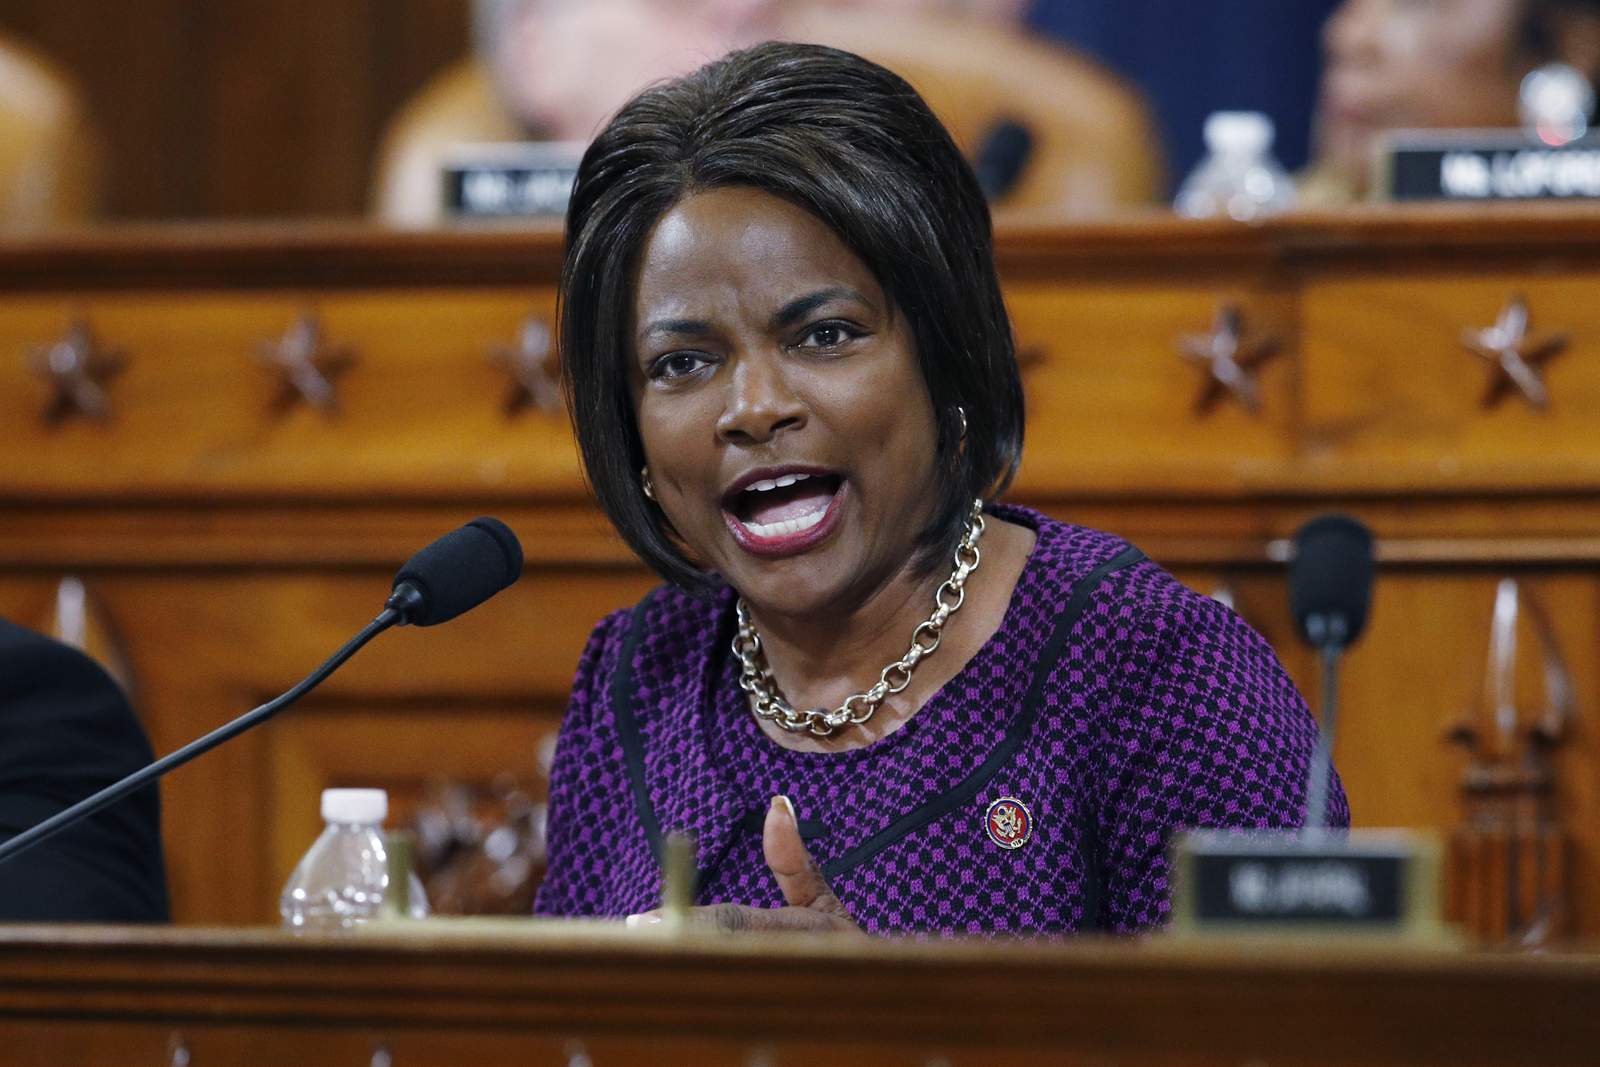 From police chief to VP? Inside Val Demings' unlikely path